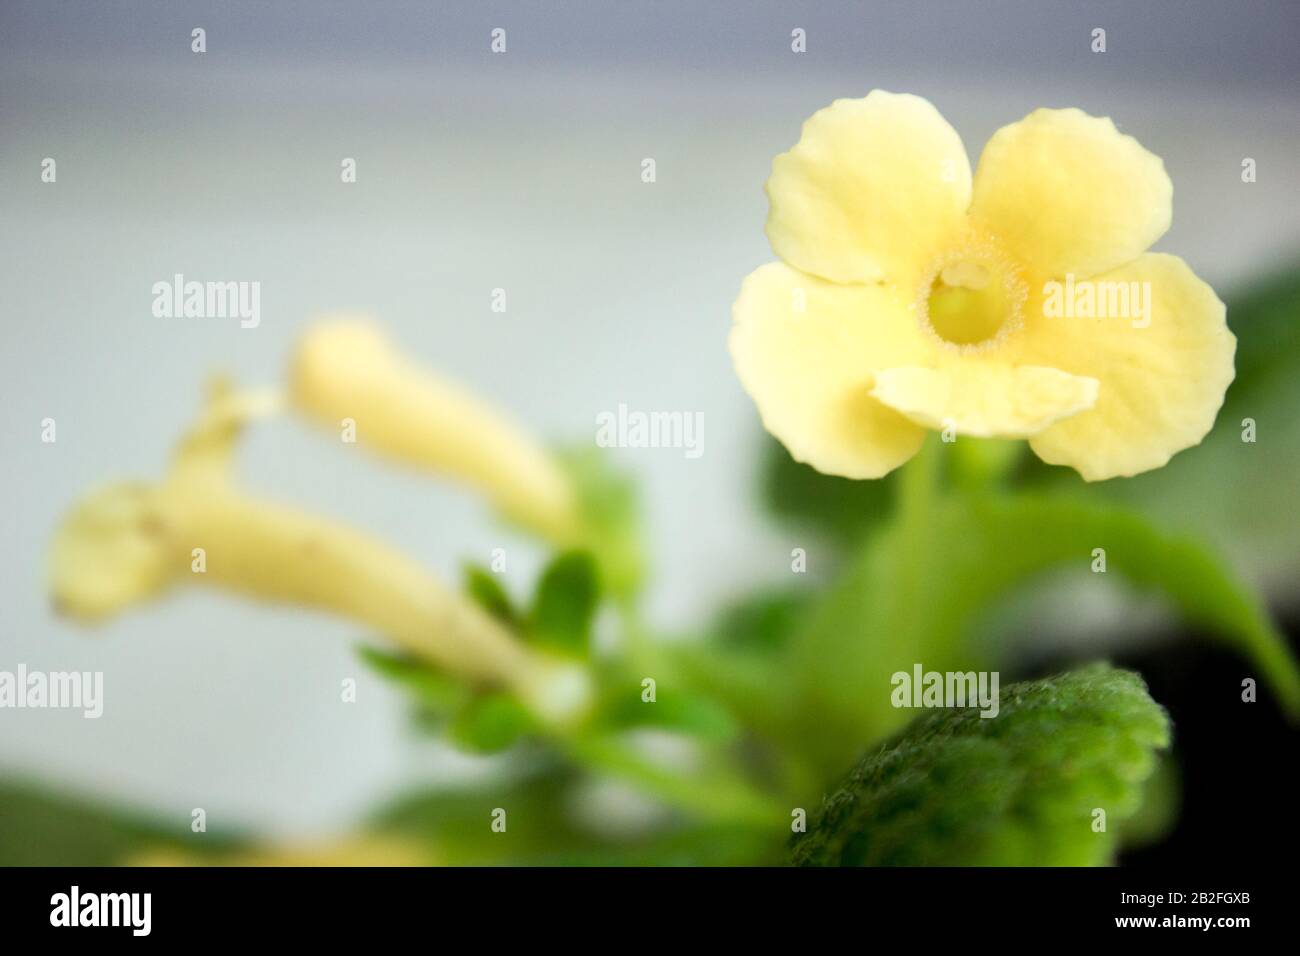 close up view of yellow Episcia home plant Stock Photo